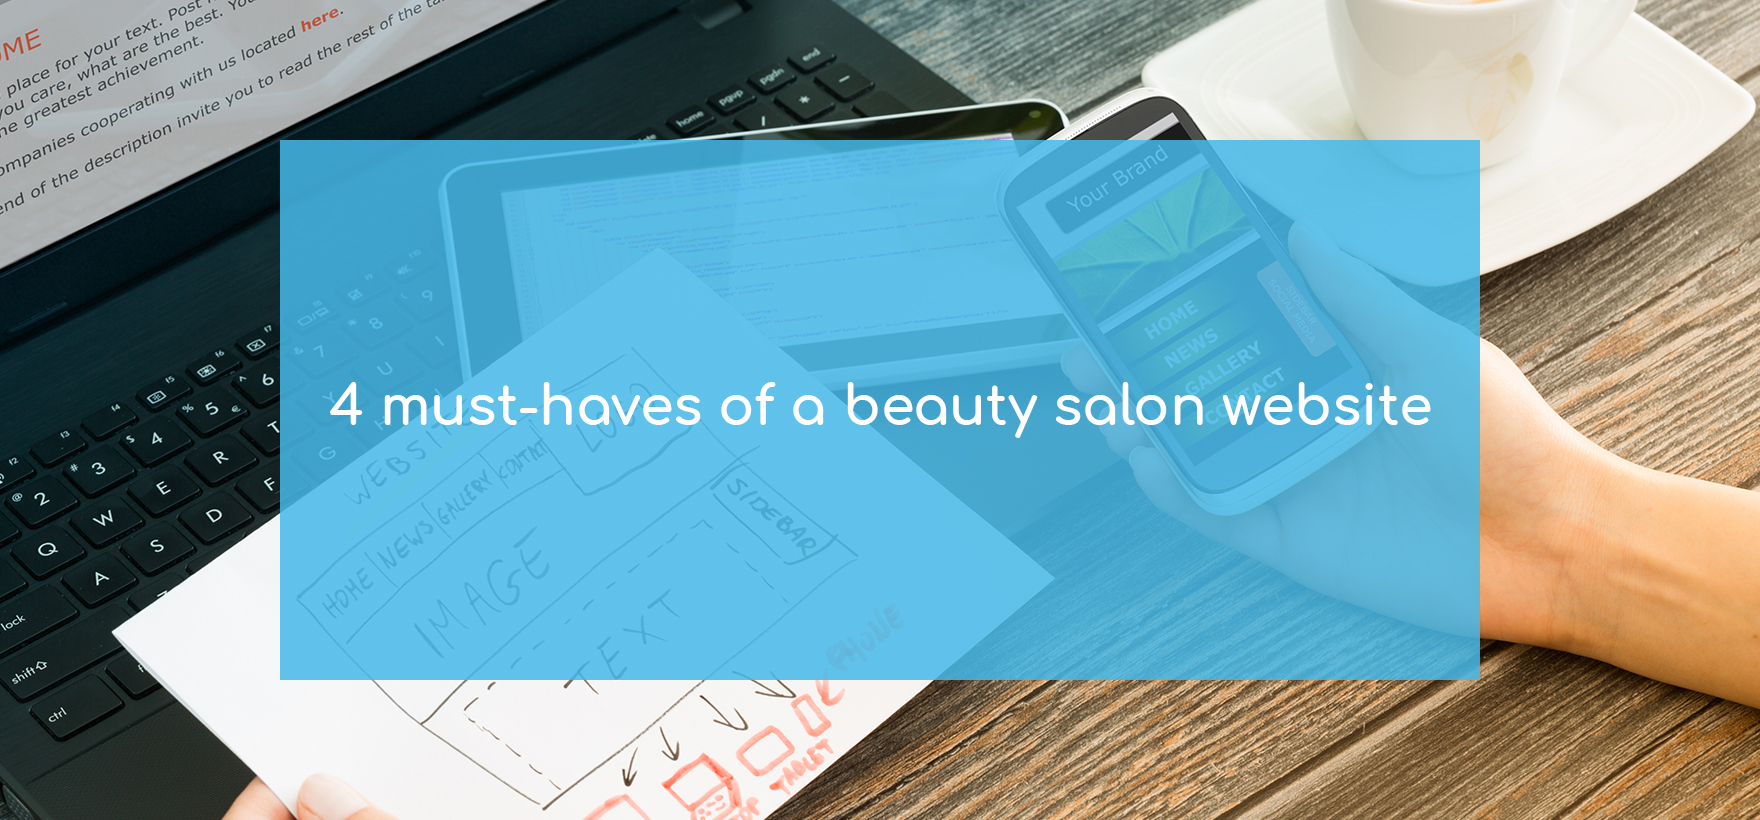 4 must-haves of a beauty salon website. Salon websites ideas for perfect results